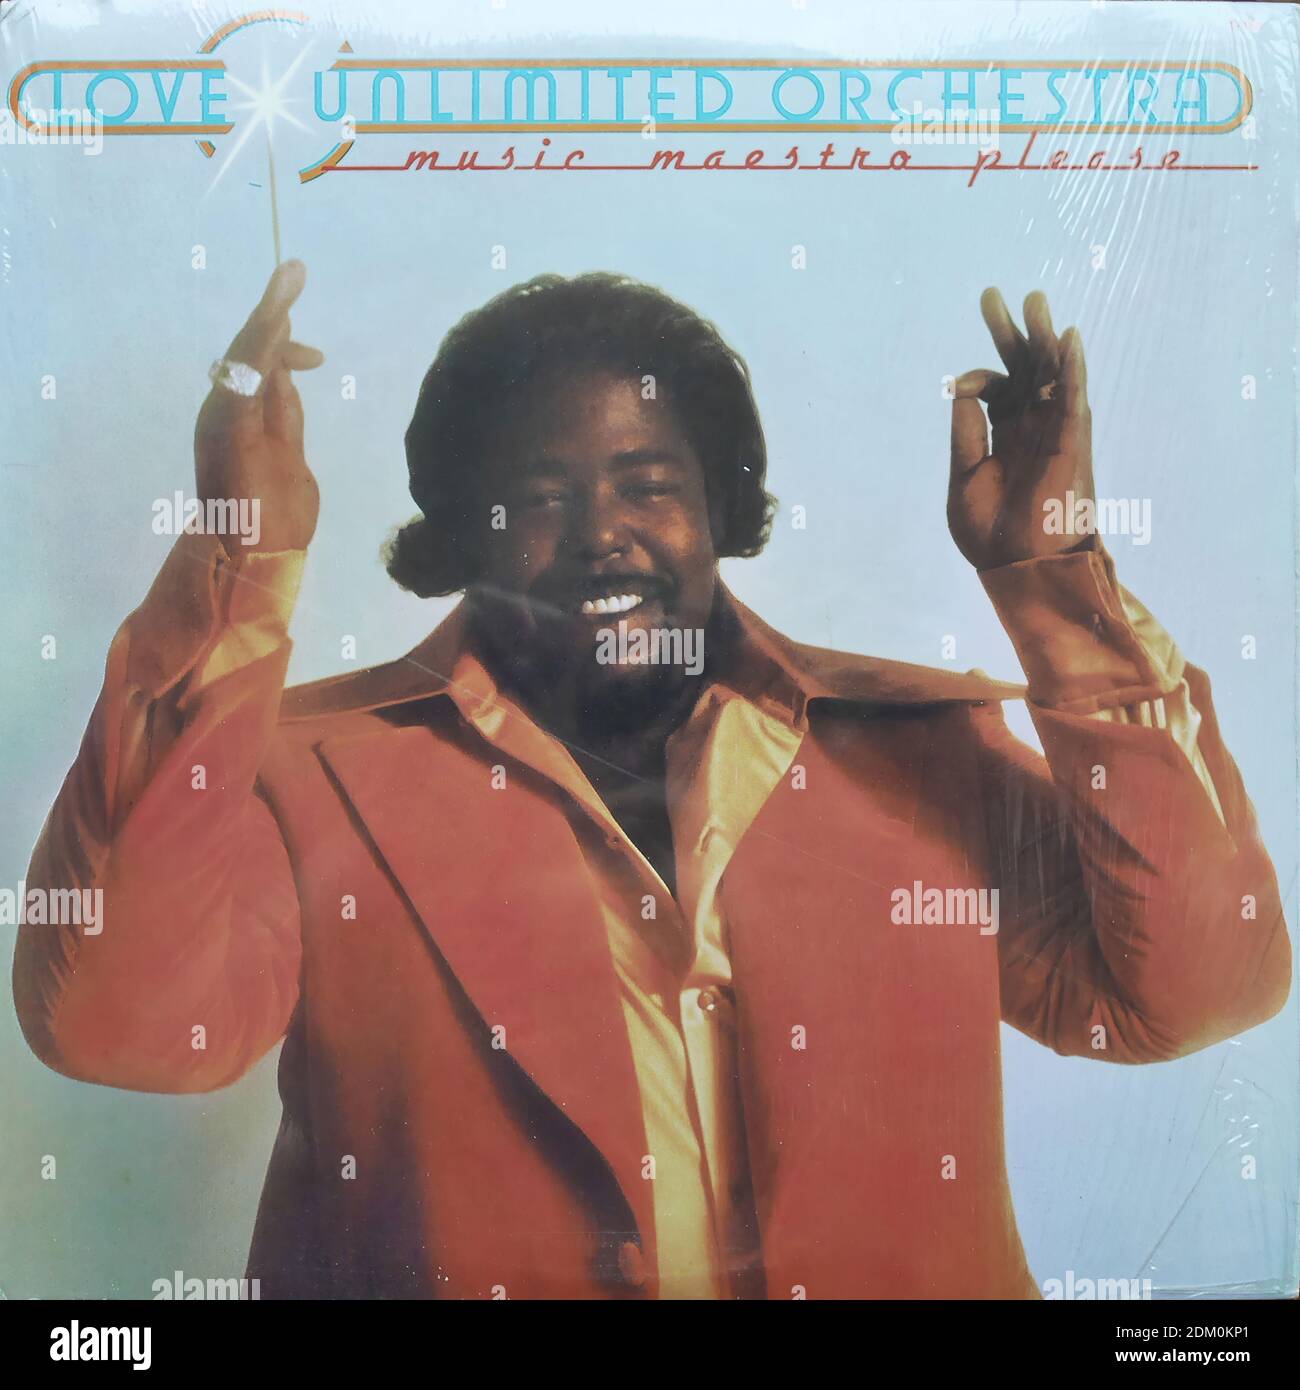 Barry White & The Love Unlimited Orchestra - Music Maestro Please, 1975 -  Vintage vinyl album cover Stock Photo - Alamy